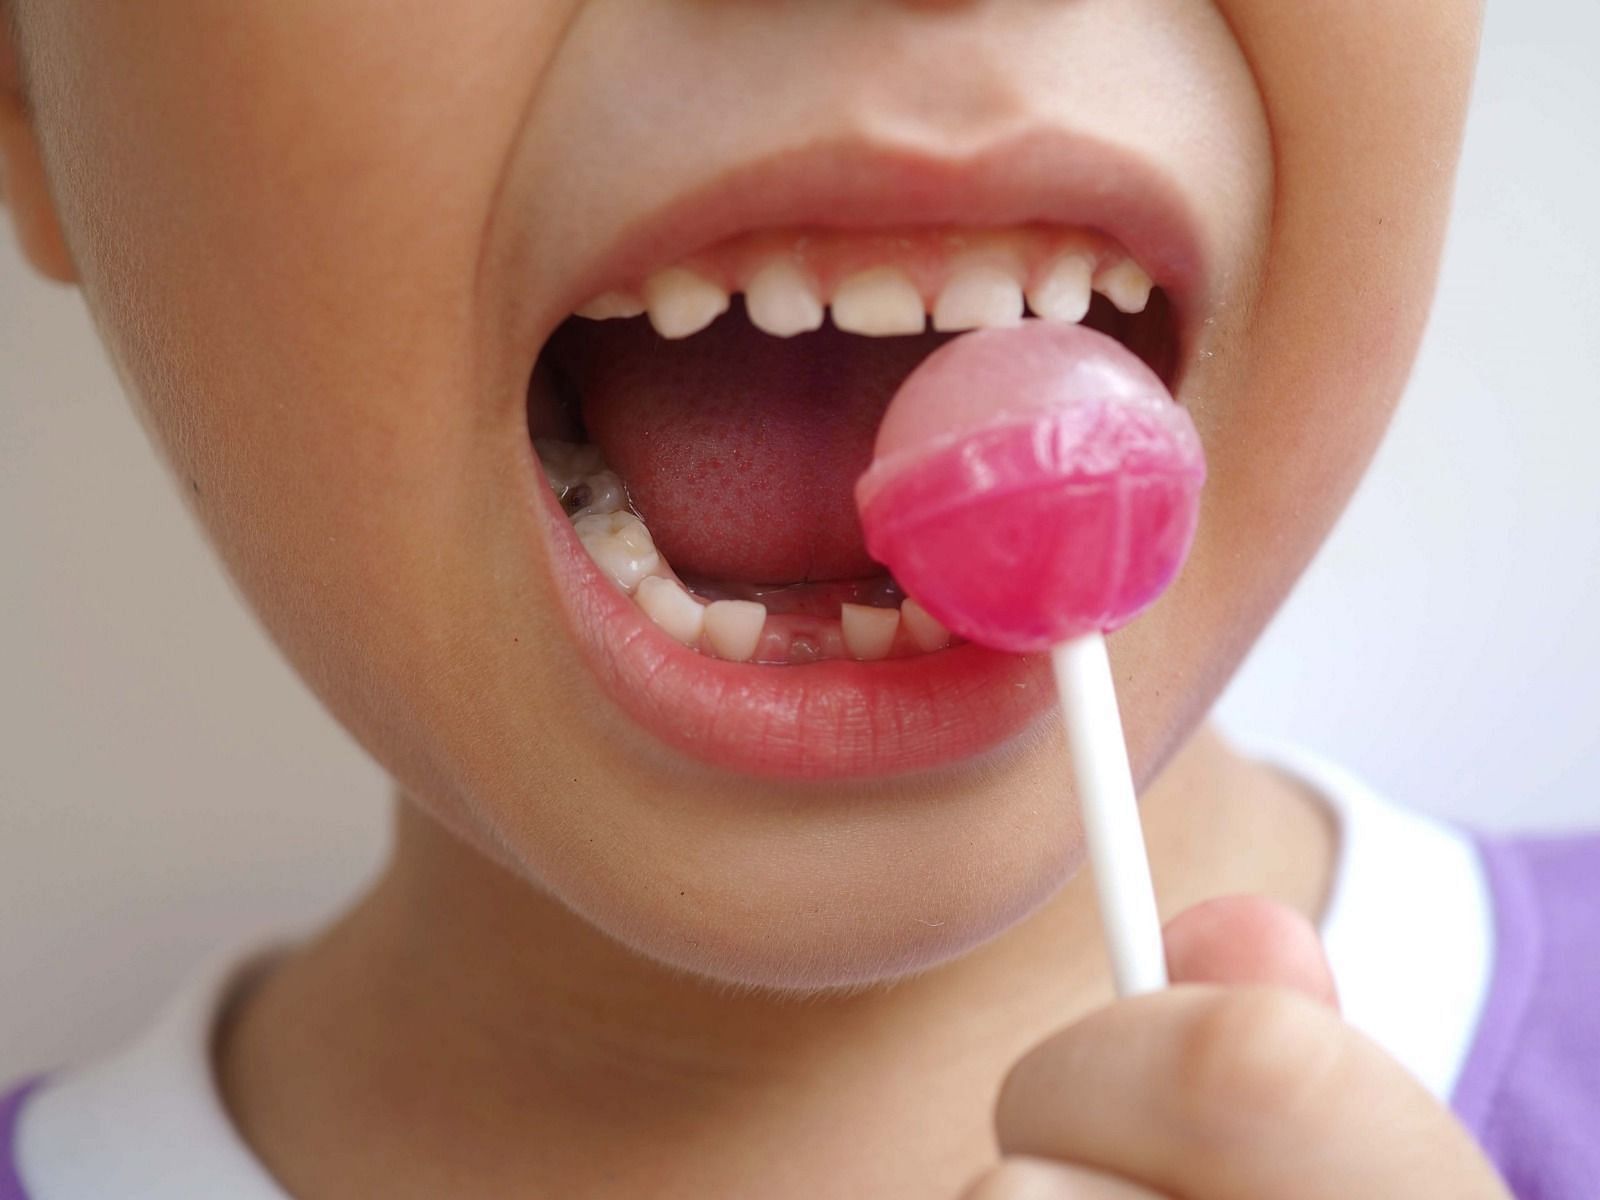 Rotten teeth (Image via Getty Images)